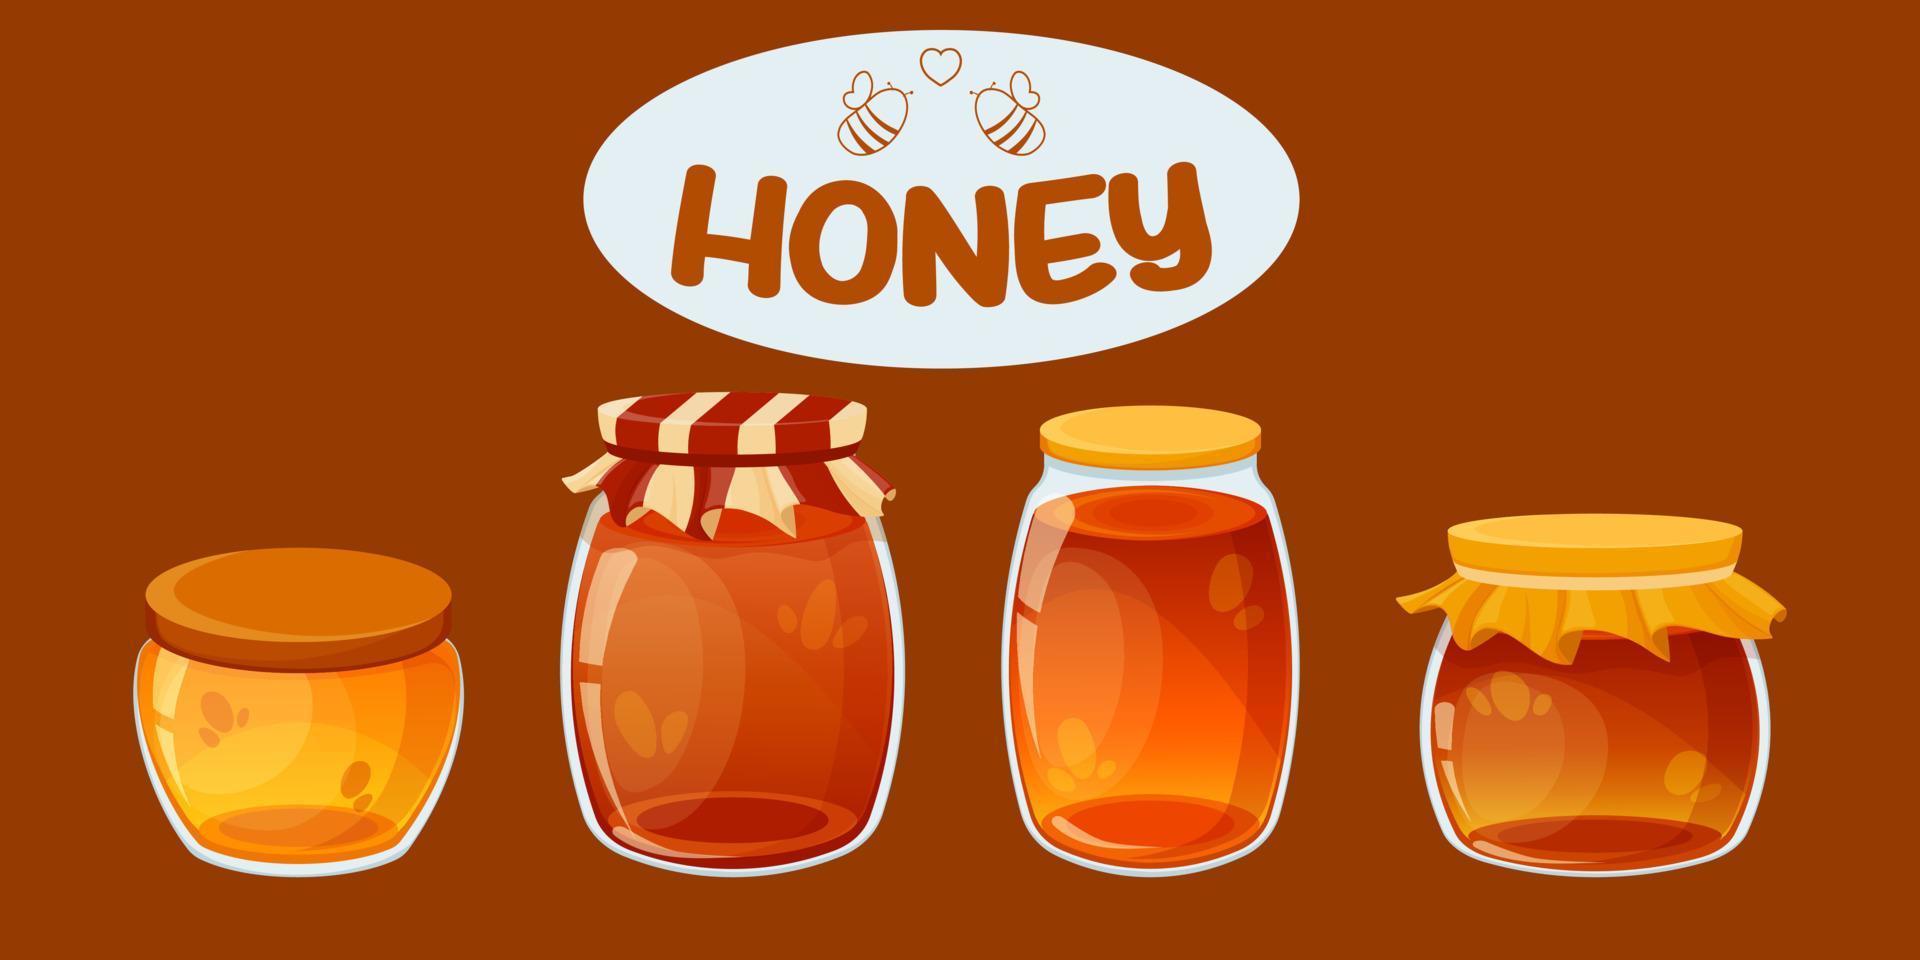 Jars, jugs, pots with honey. Honey of different types. Dark and light honey in jars. Jar with lid with ruffles. Logo for honey packaging vector